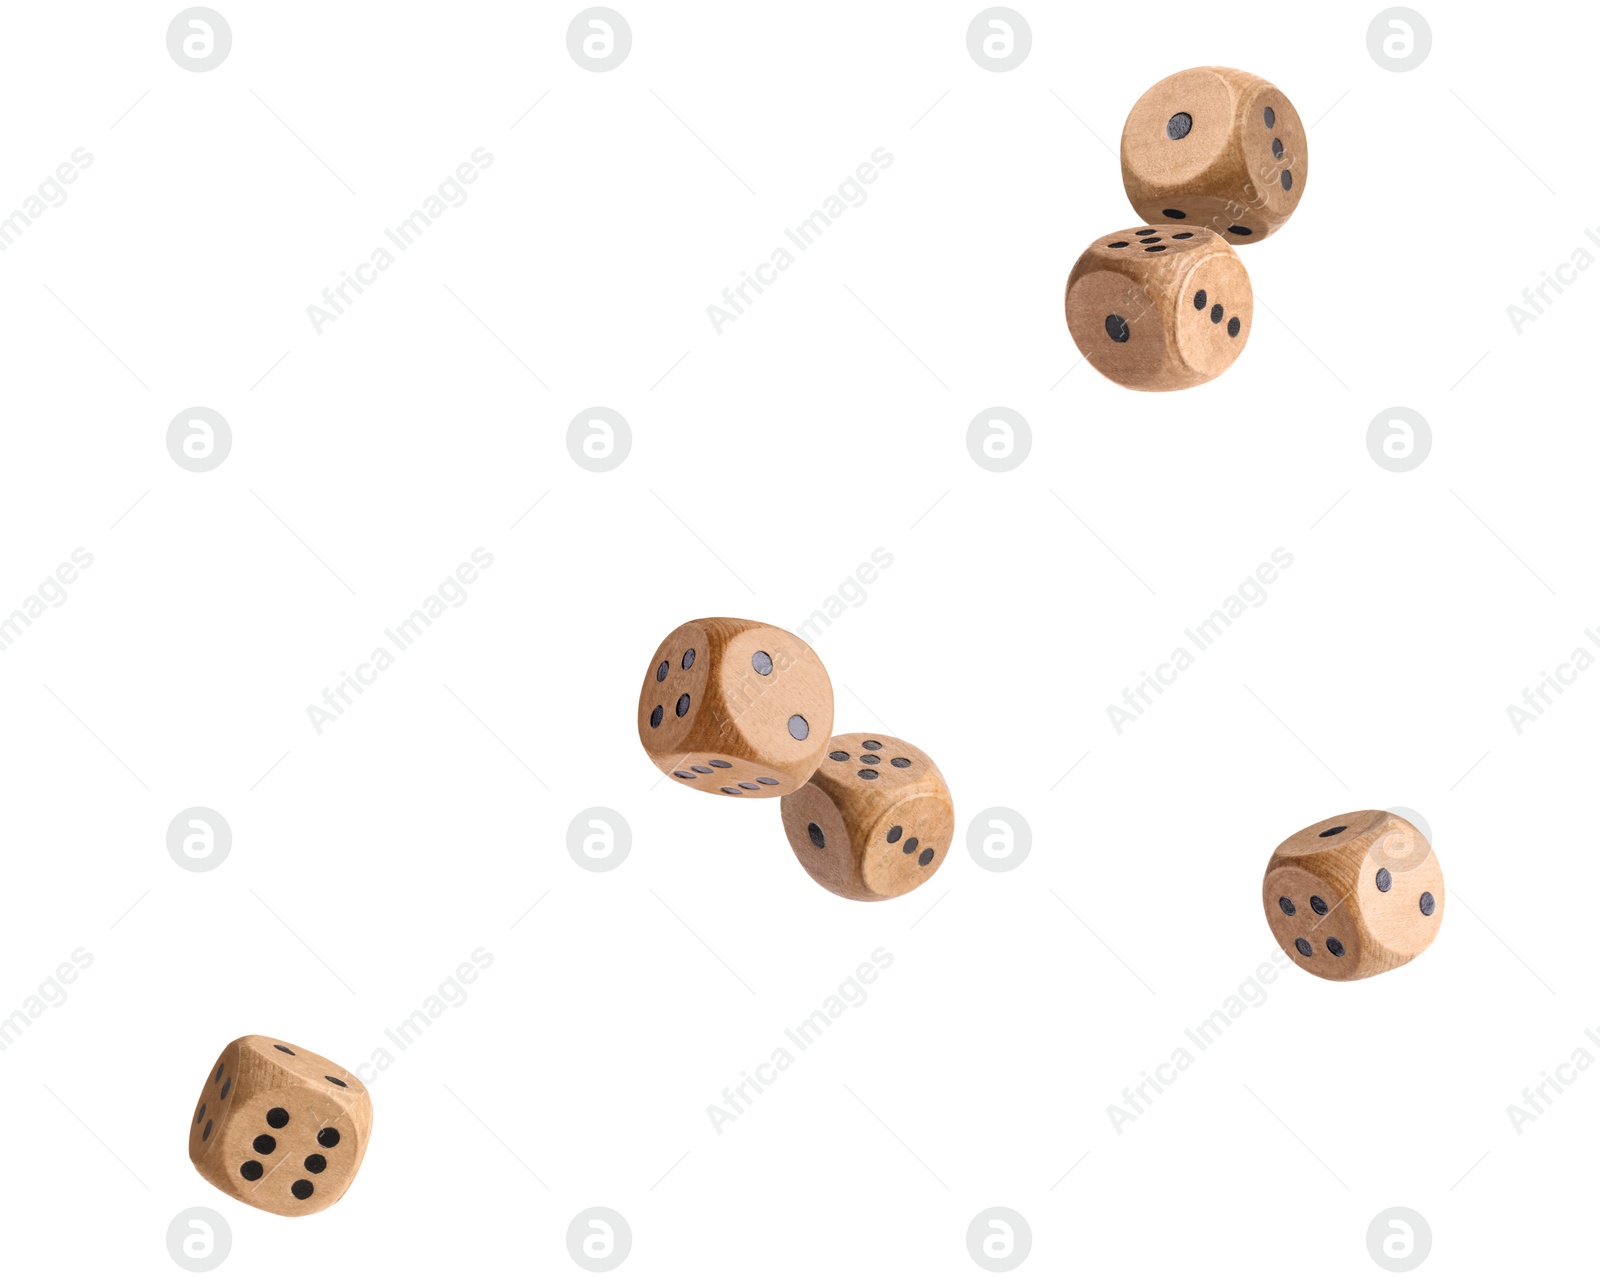 Image of Six wooden dice in air on white background